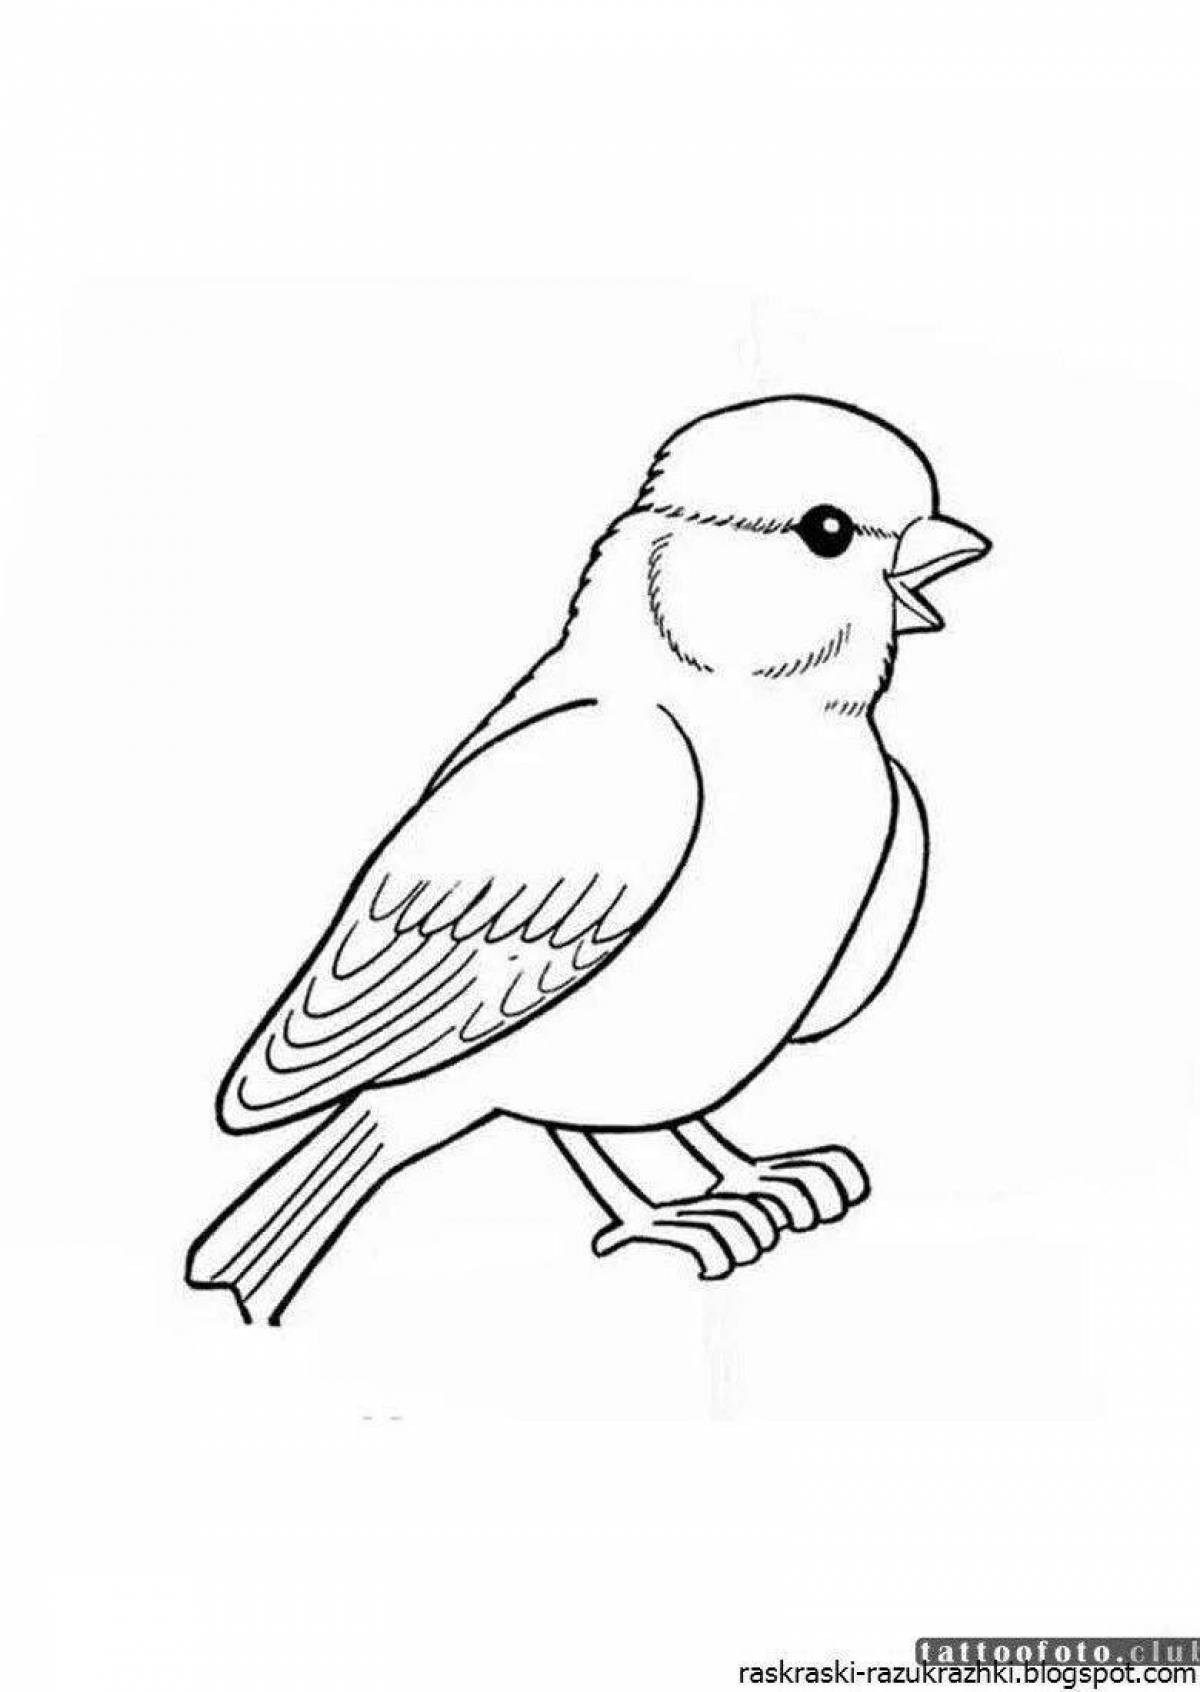 Sparkling sparrow coloring book for kids